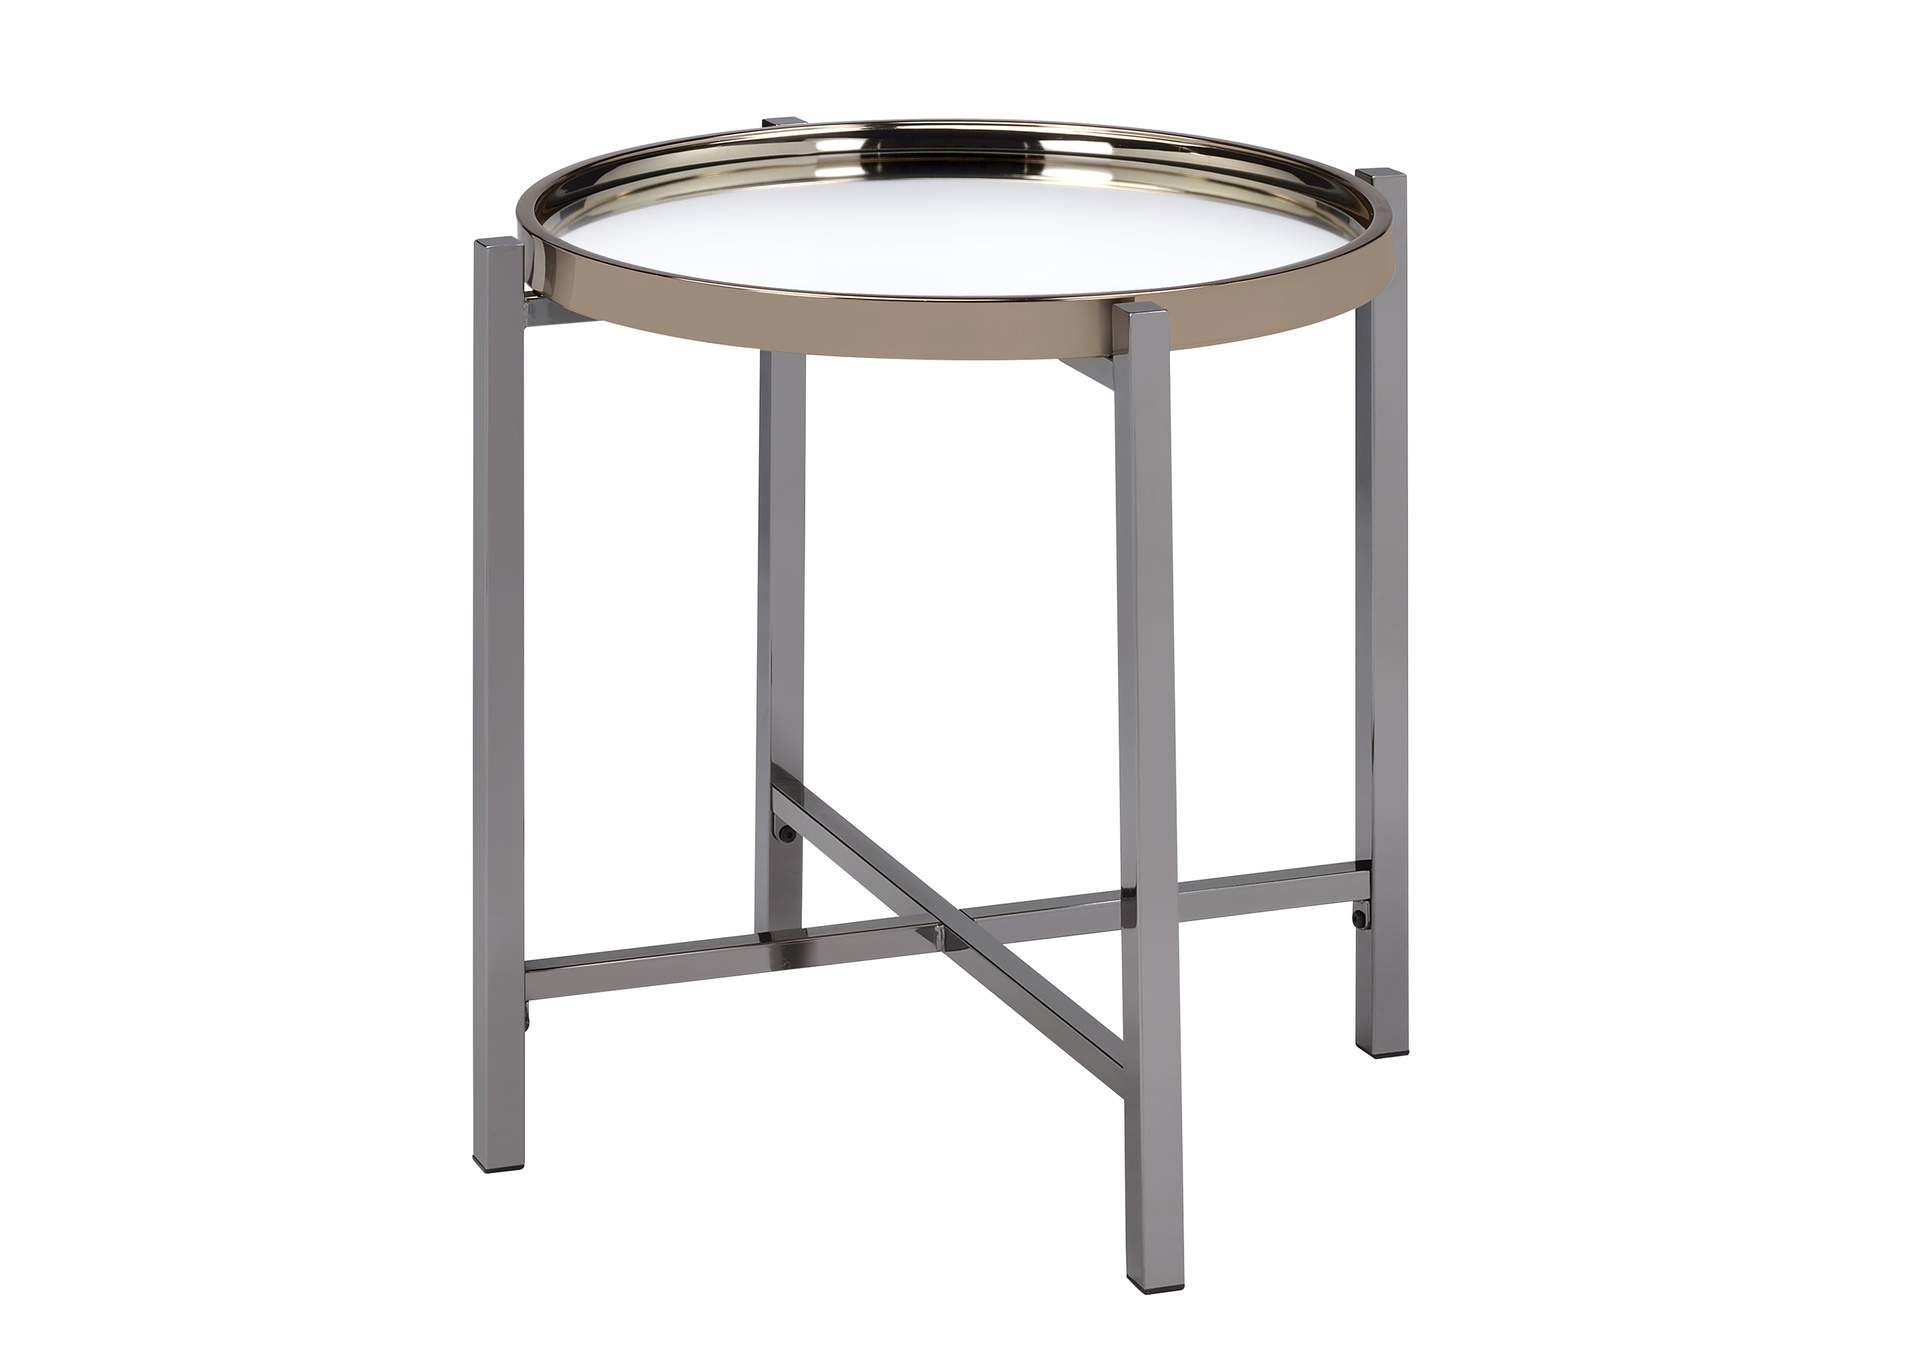 Edith C - 1112 End Table,Elements